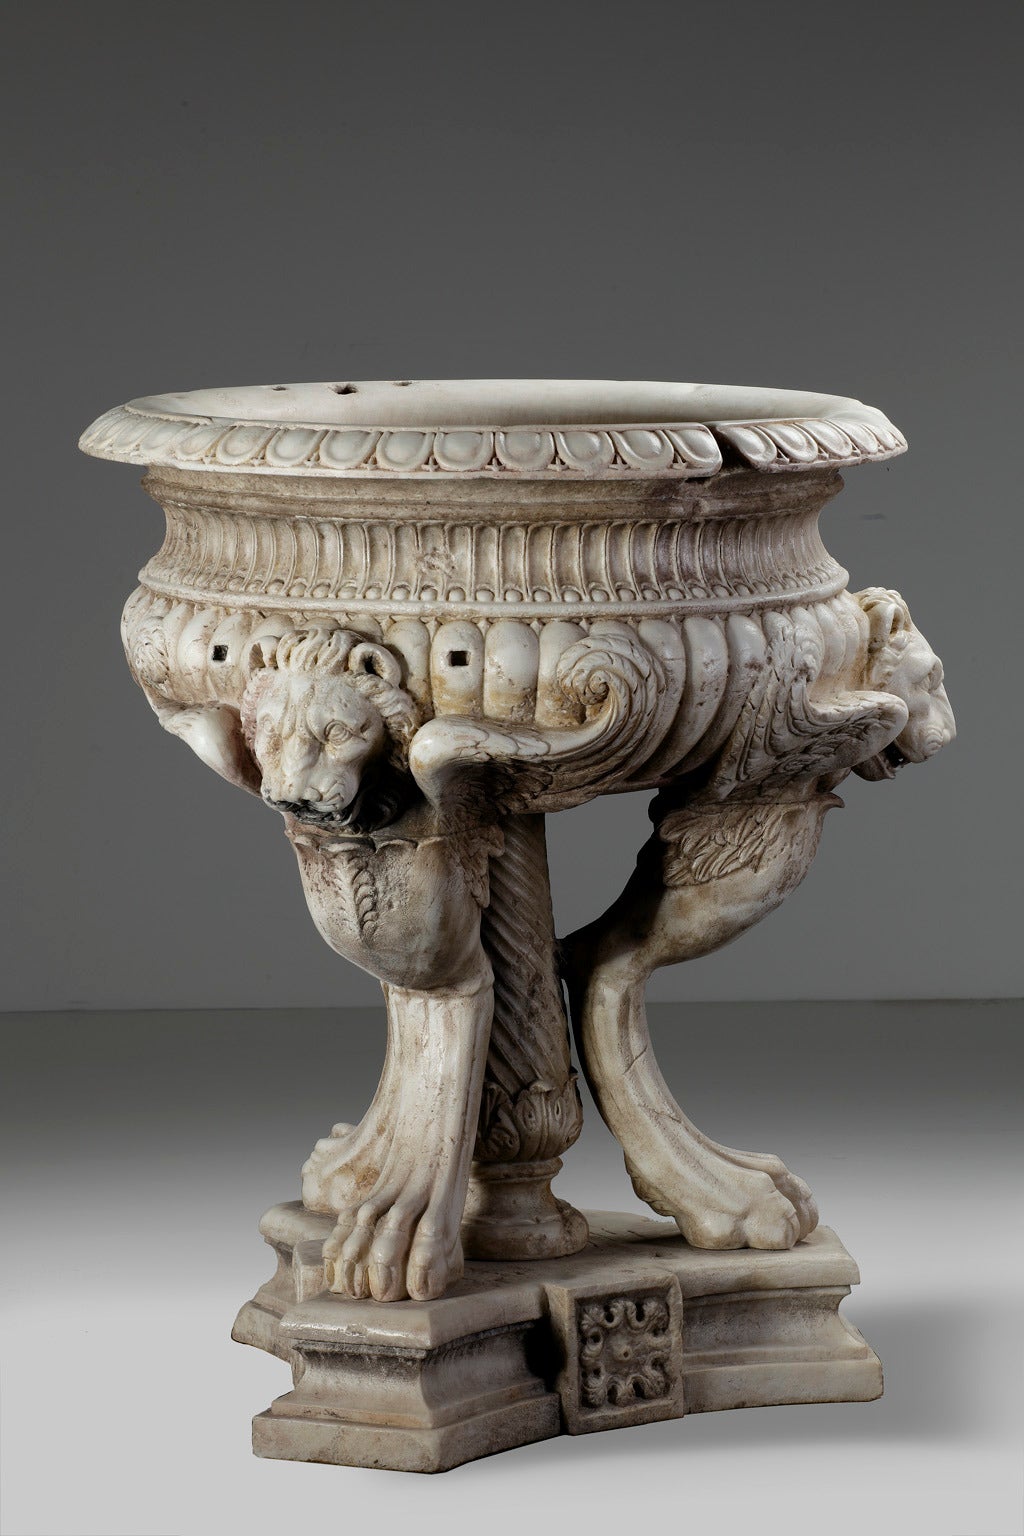 Classical Roman Sculpted White Marble Planter in the Manner of a 1st/2nd Century, Ad Roman Altar